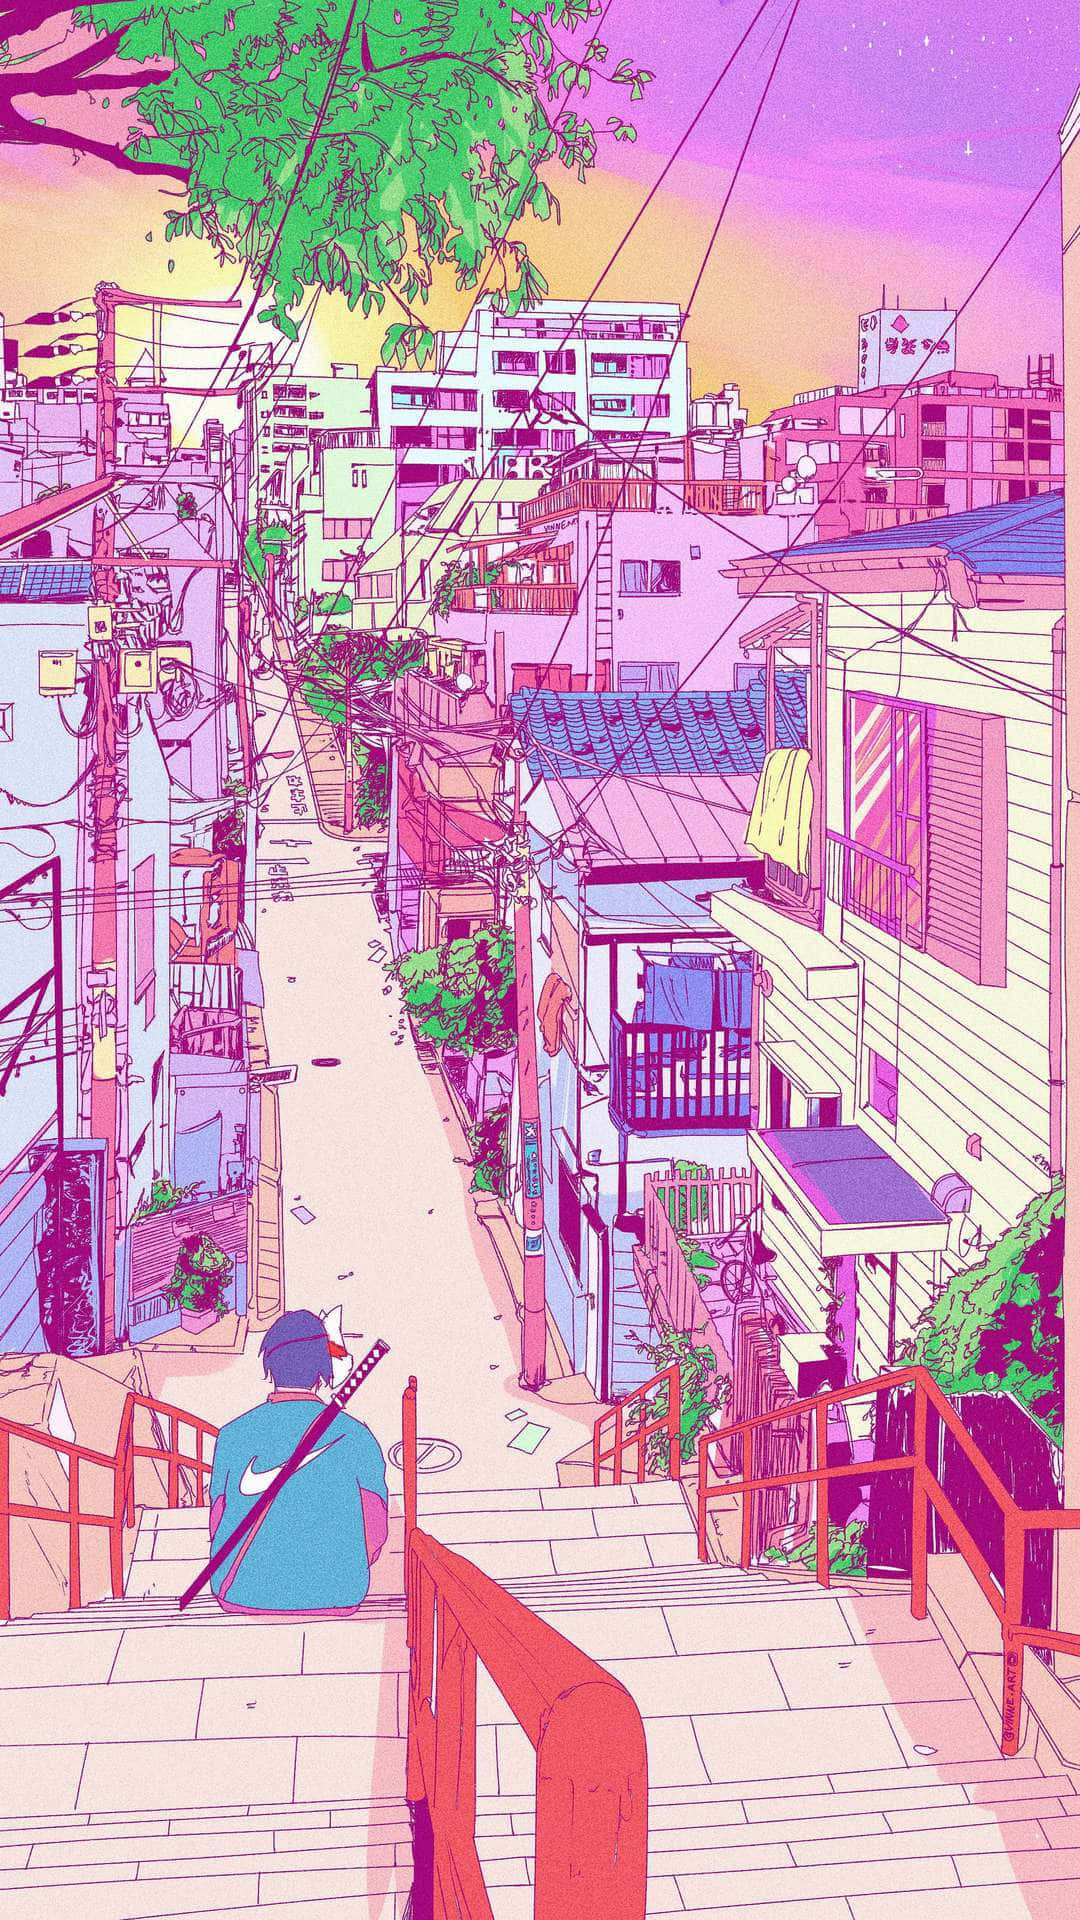 Explore a world of color and imagination with an anime aesthetic